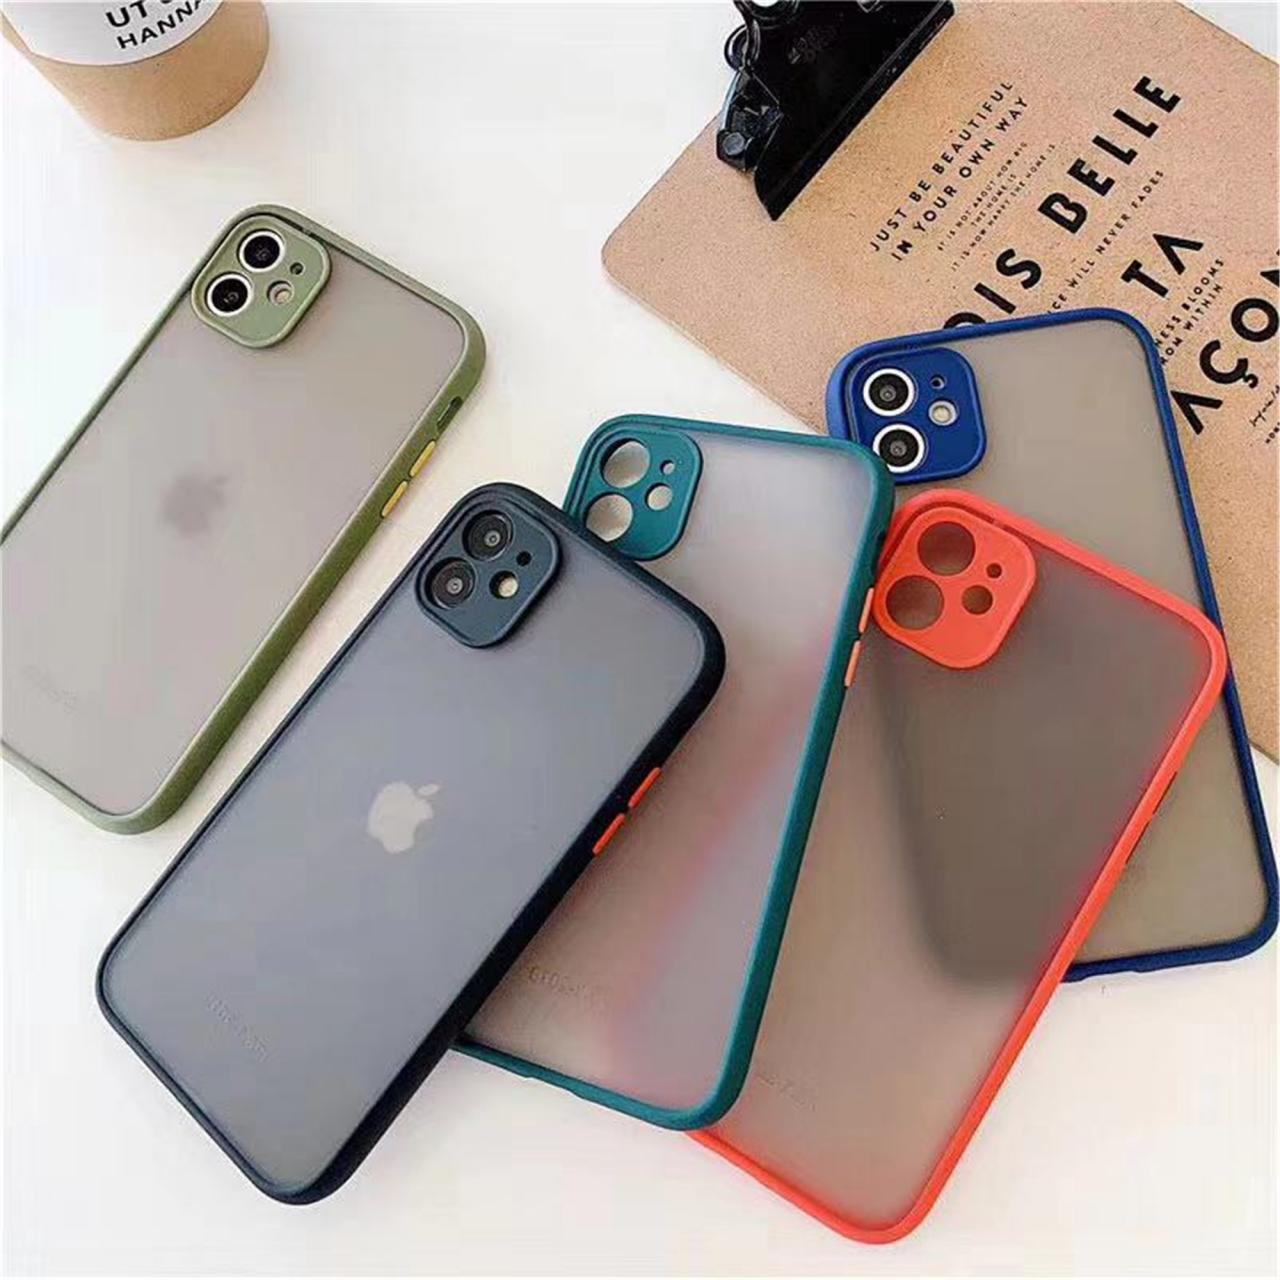 Camera Protection Bumper Phone Cases For Iphone 13 12 11 11 Pro Max Xr Xs Max X 8 7 6s Plus Matte Translucent Shockproof Back Cover